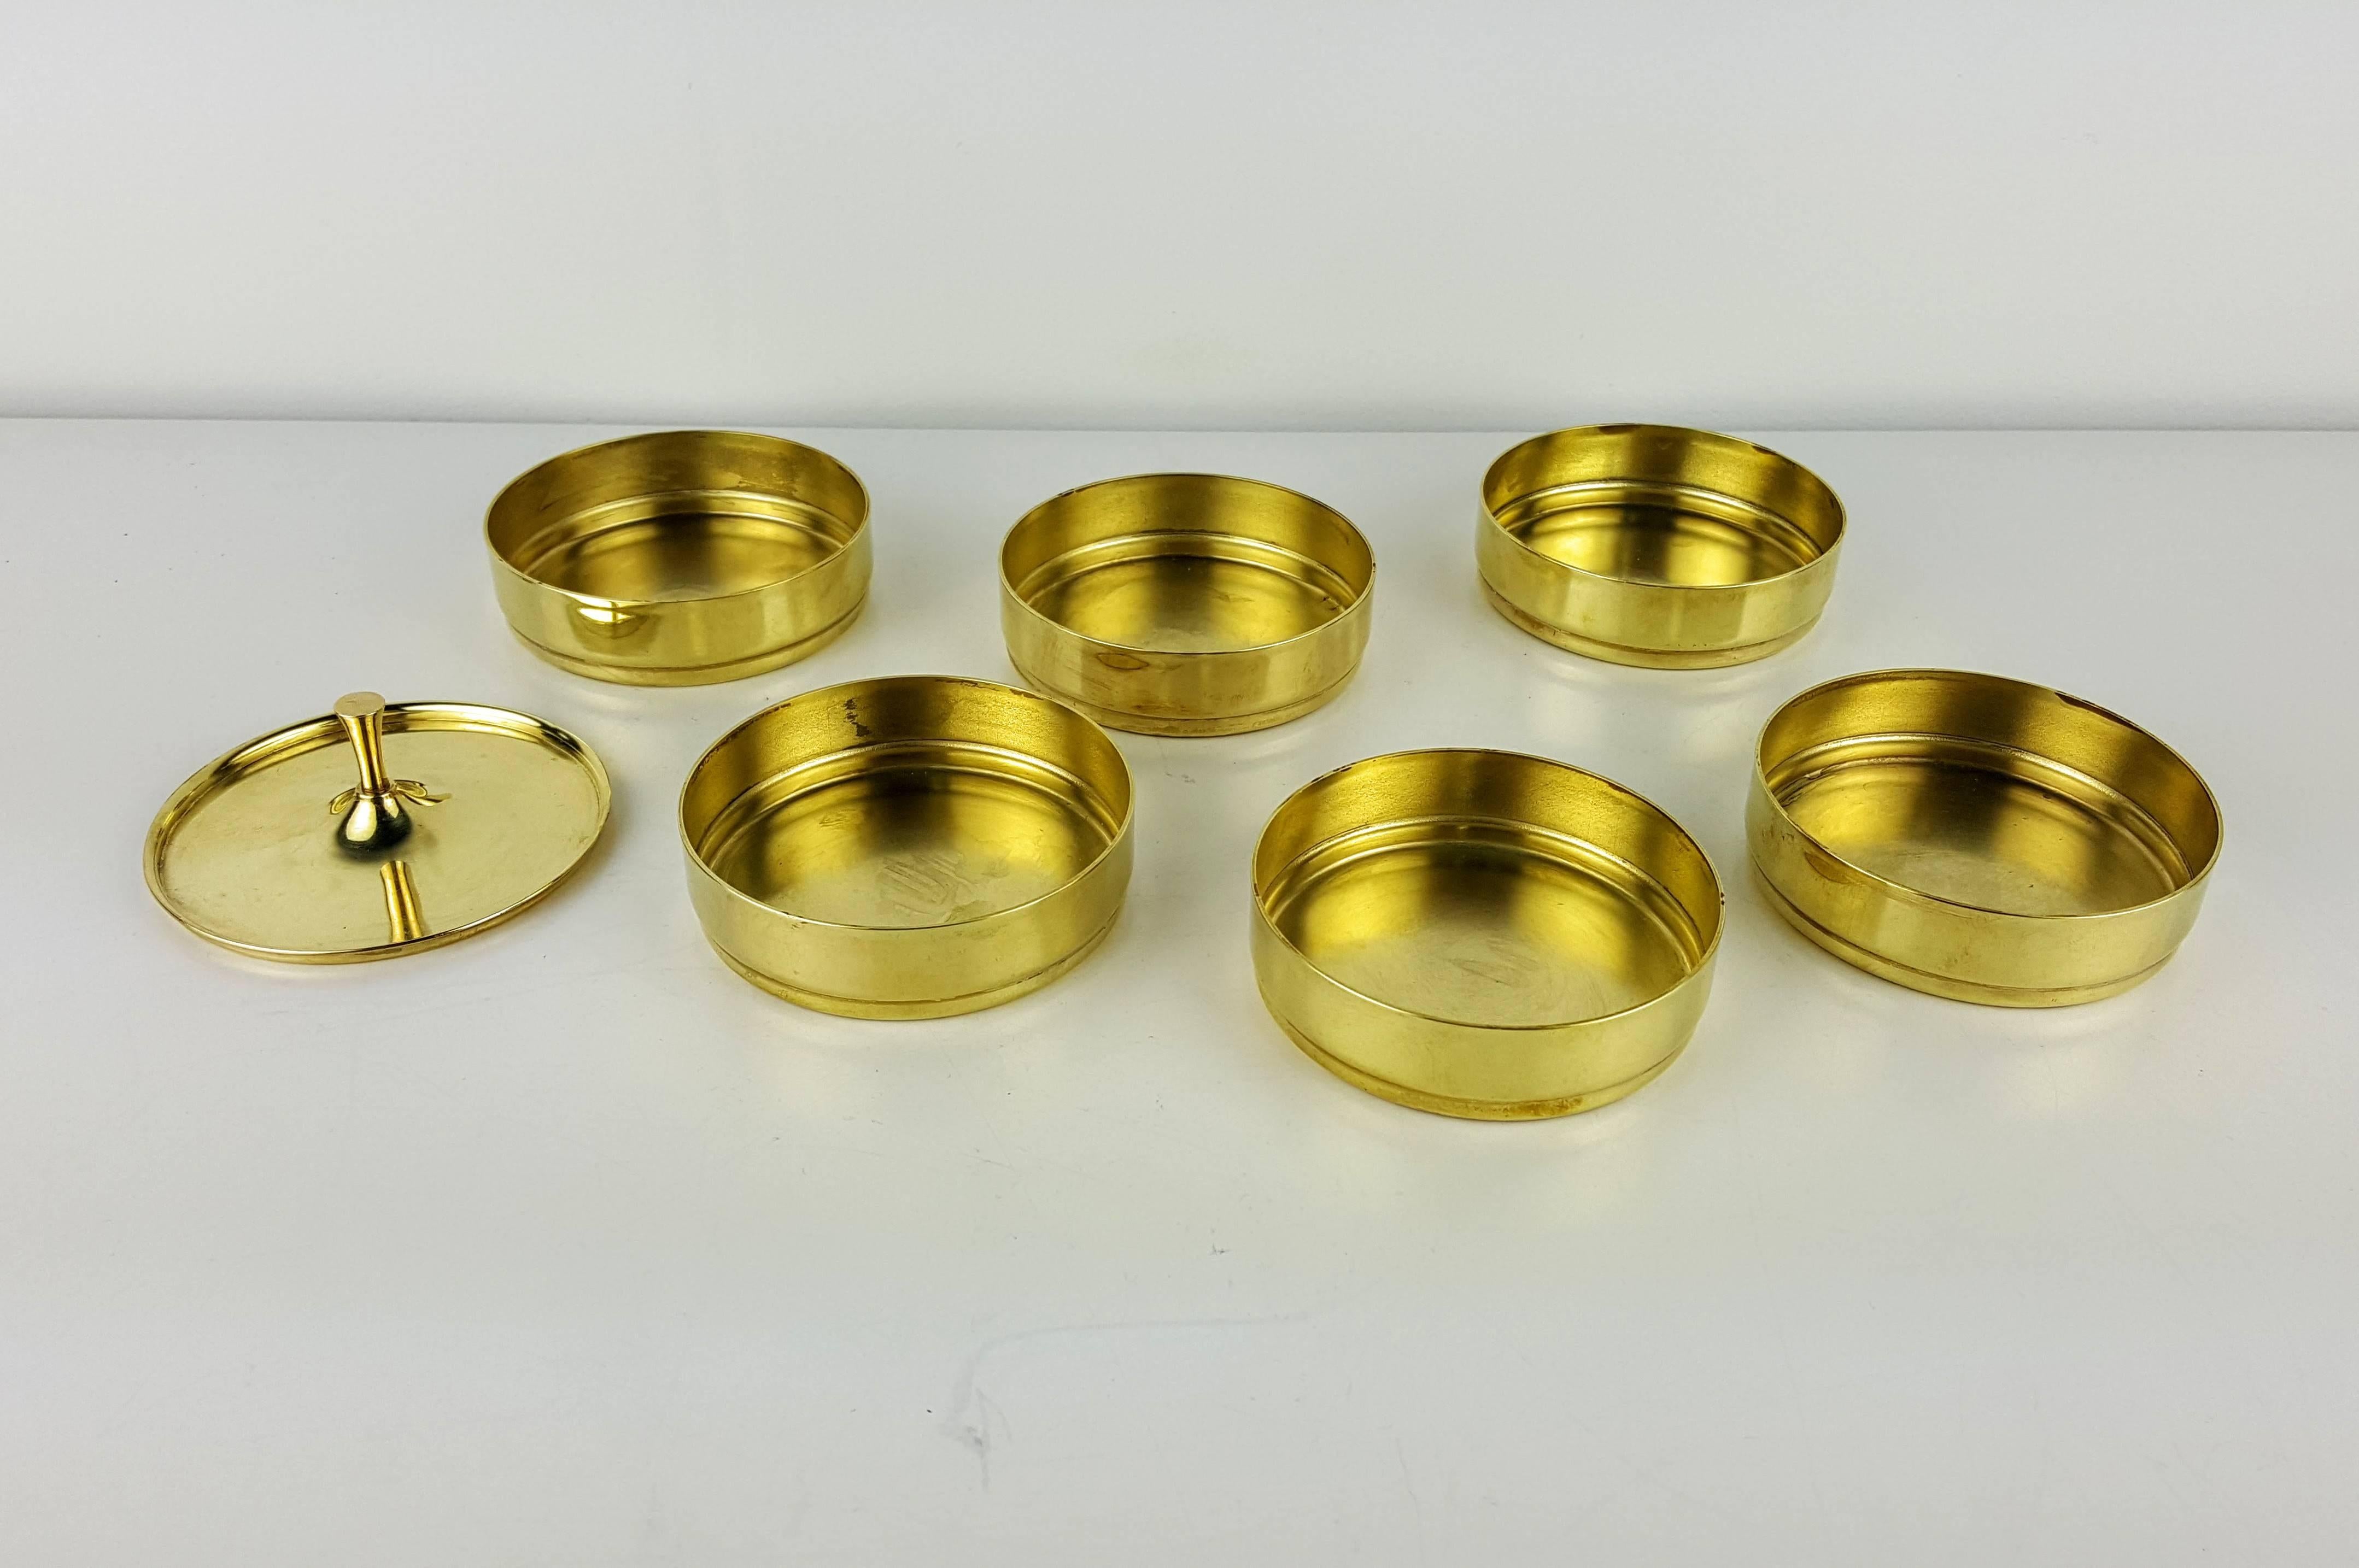 Hollywood Regency Rare Set of Brass Drink Coasters by Tommi Parzinger for Dorlyn, 1950s